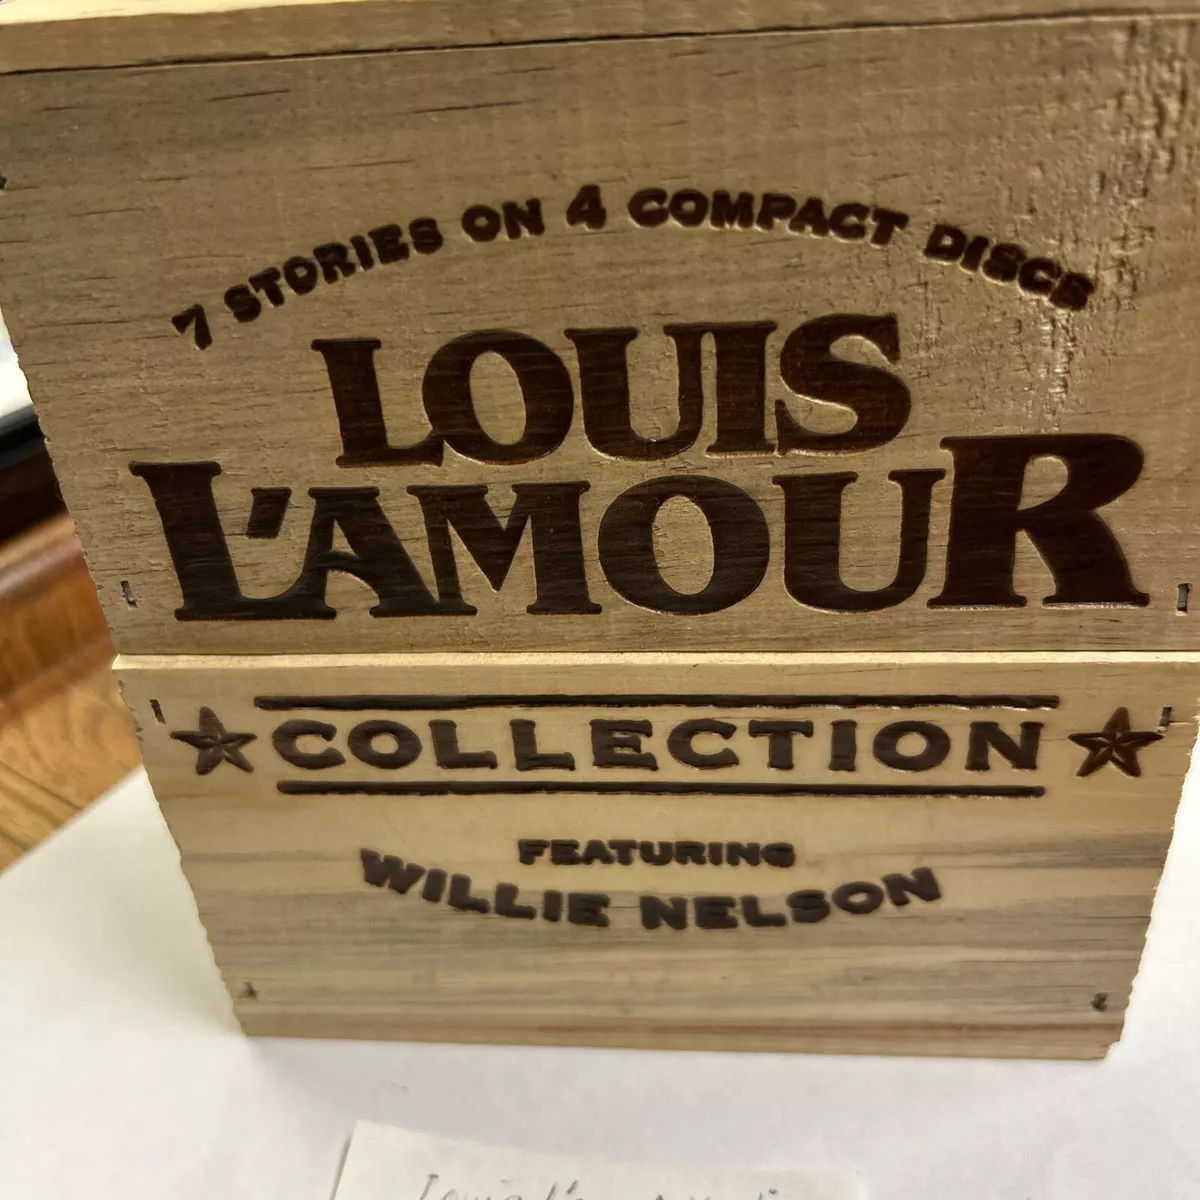 Louis L'Amour Collection Featuring Willie Nelson 7 Stories on 4 Compact  Discs